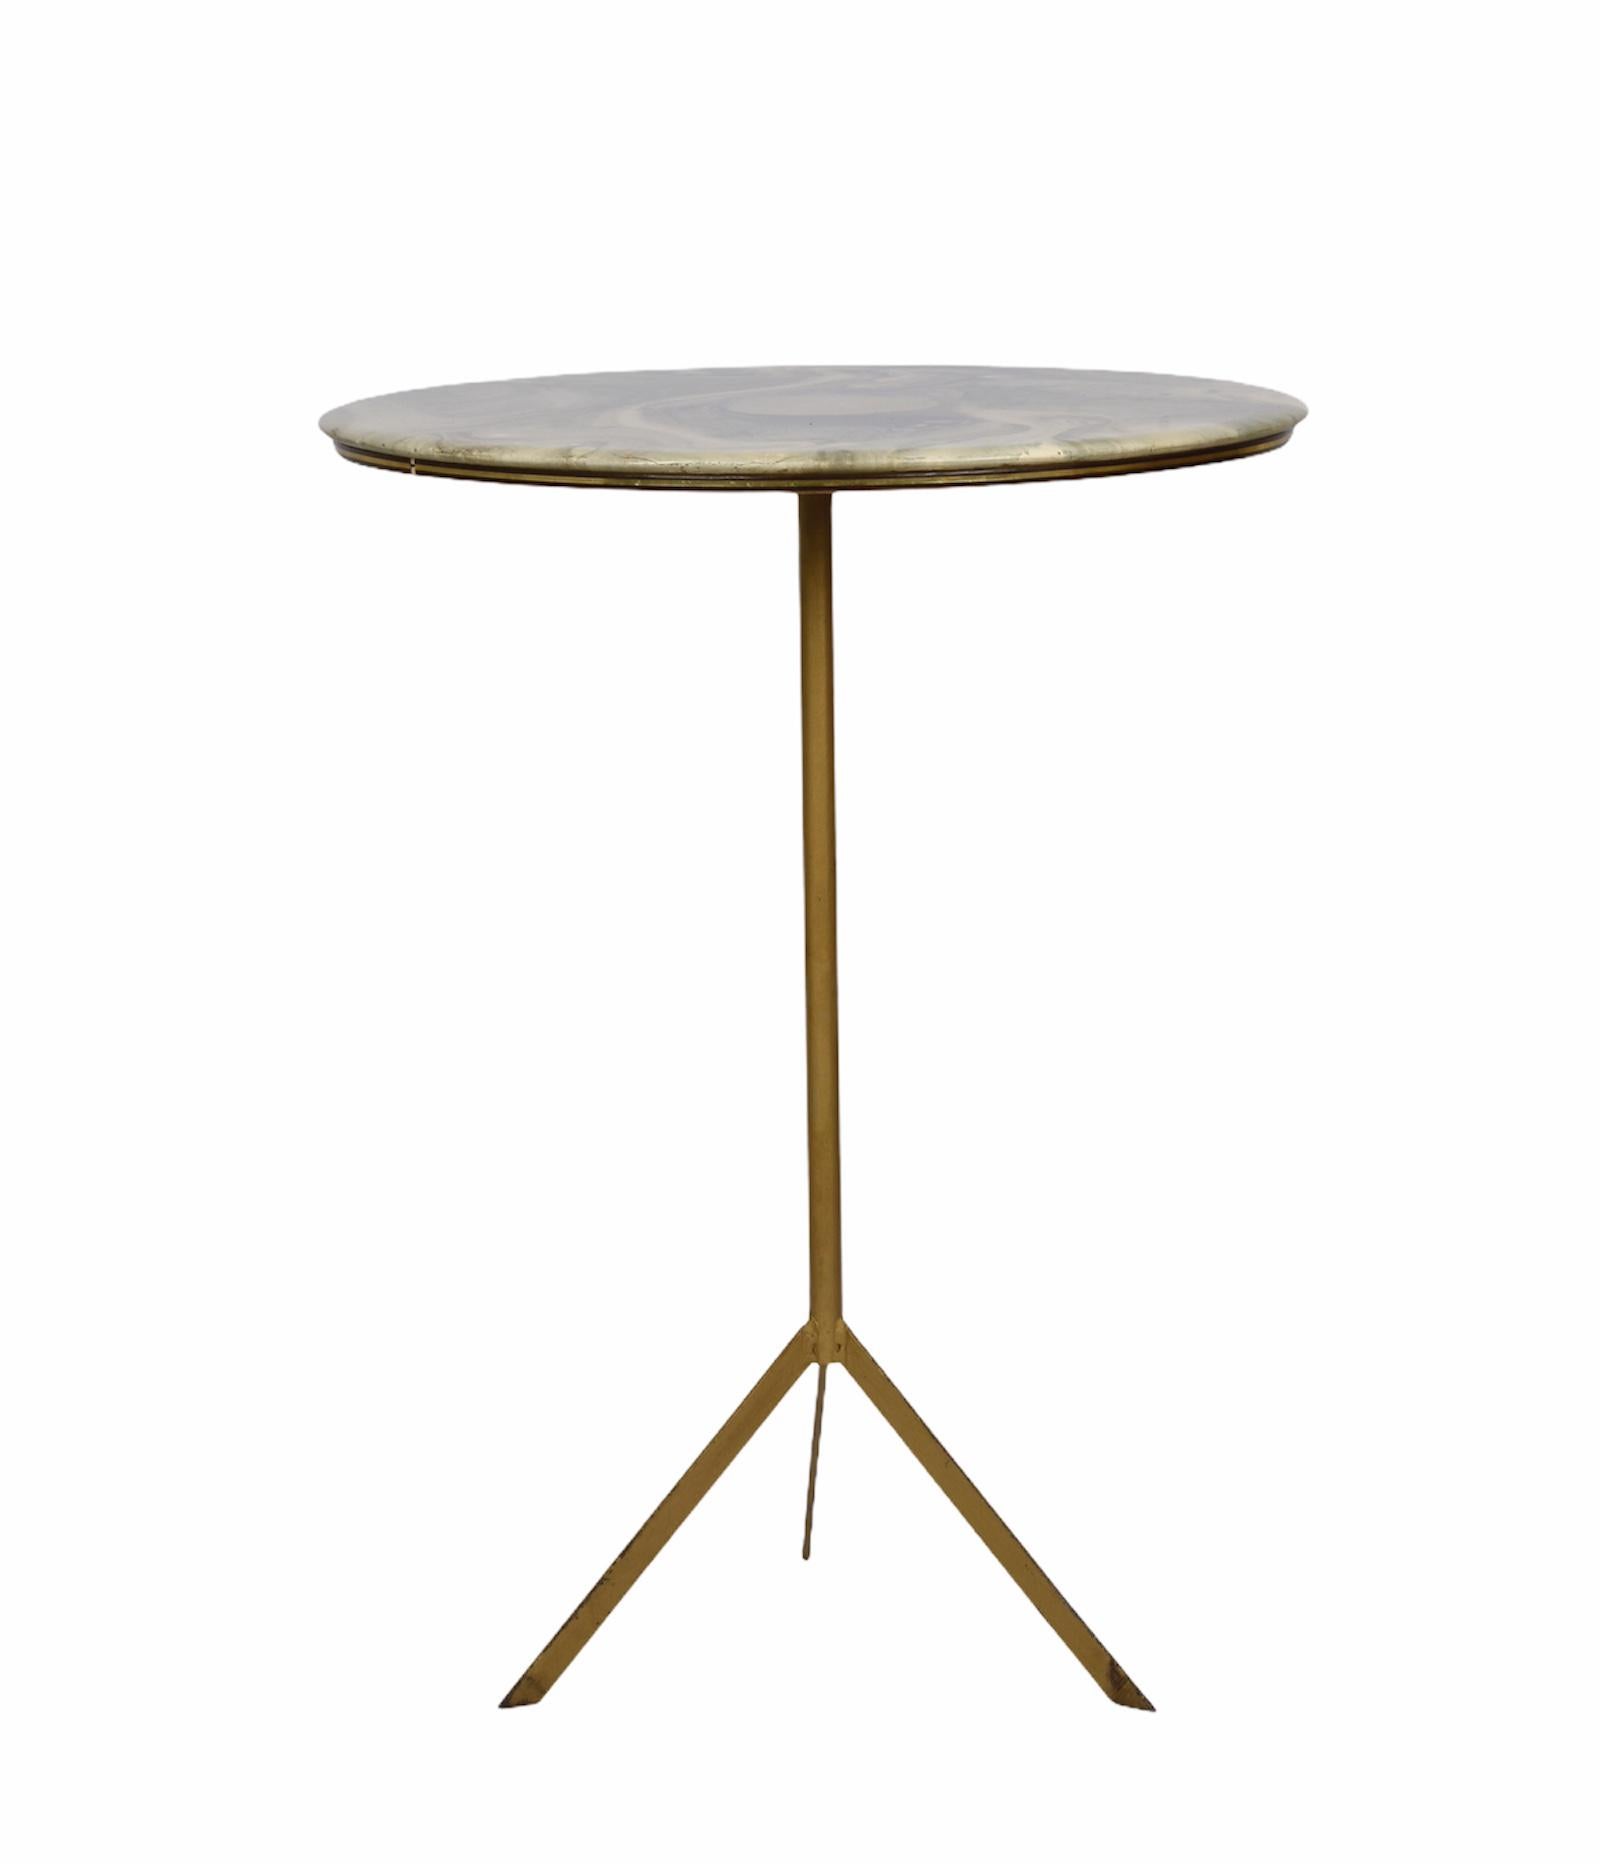 Amazing midcentury round gueridon table with marble resin top and metal. This wonderful piece was designed in Italy during the 1950s.

This great piece has a fantastic marbled resin top with a simple but solid gold-painted metal structure.

A